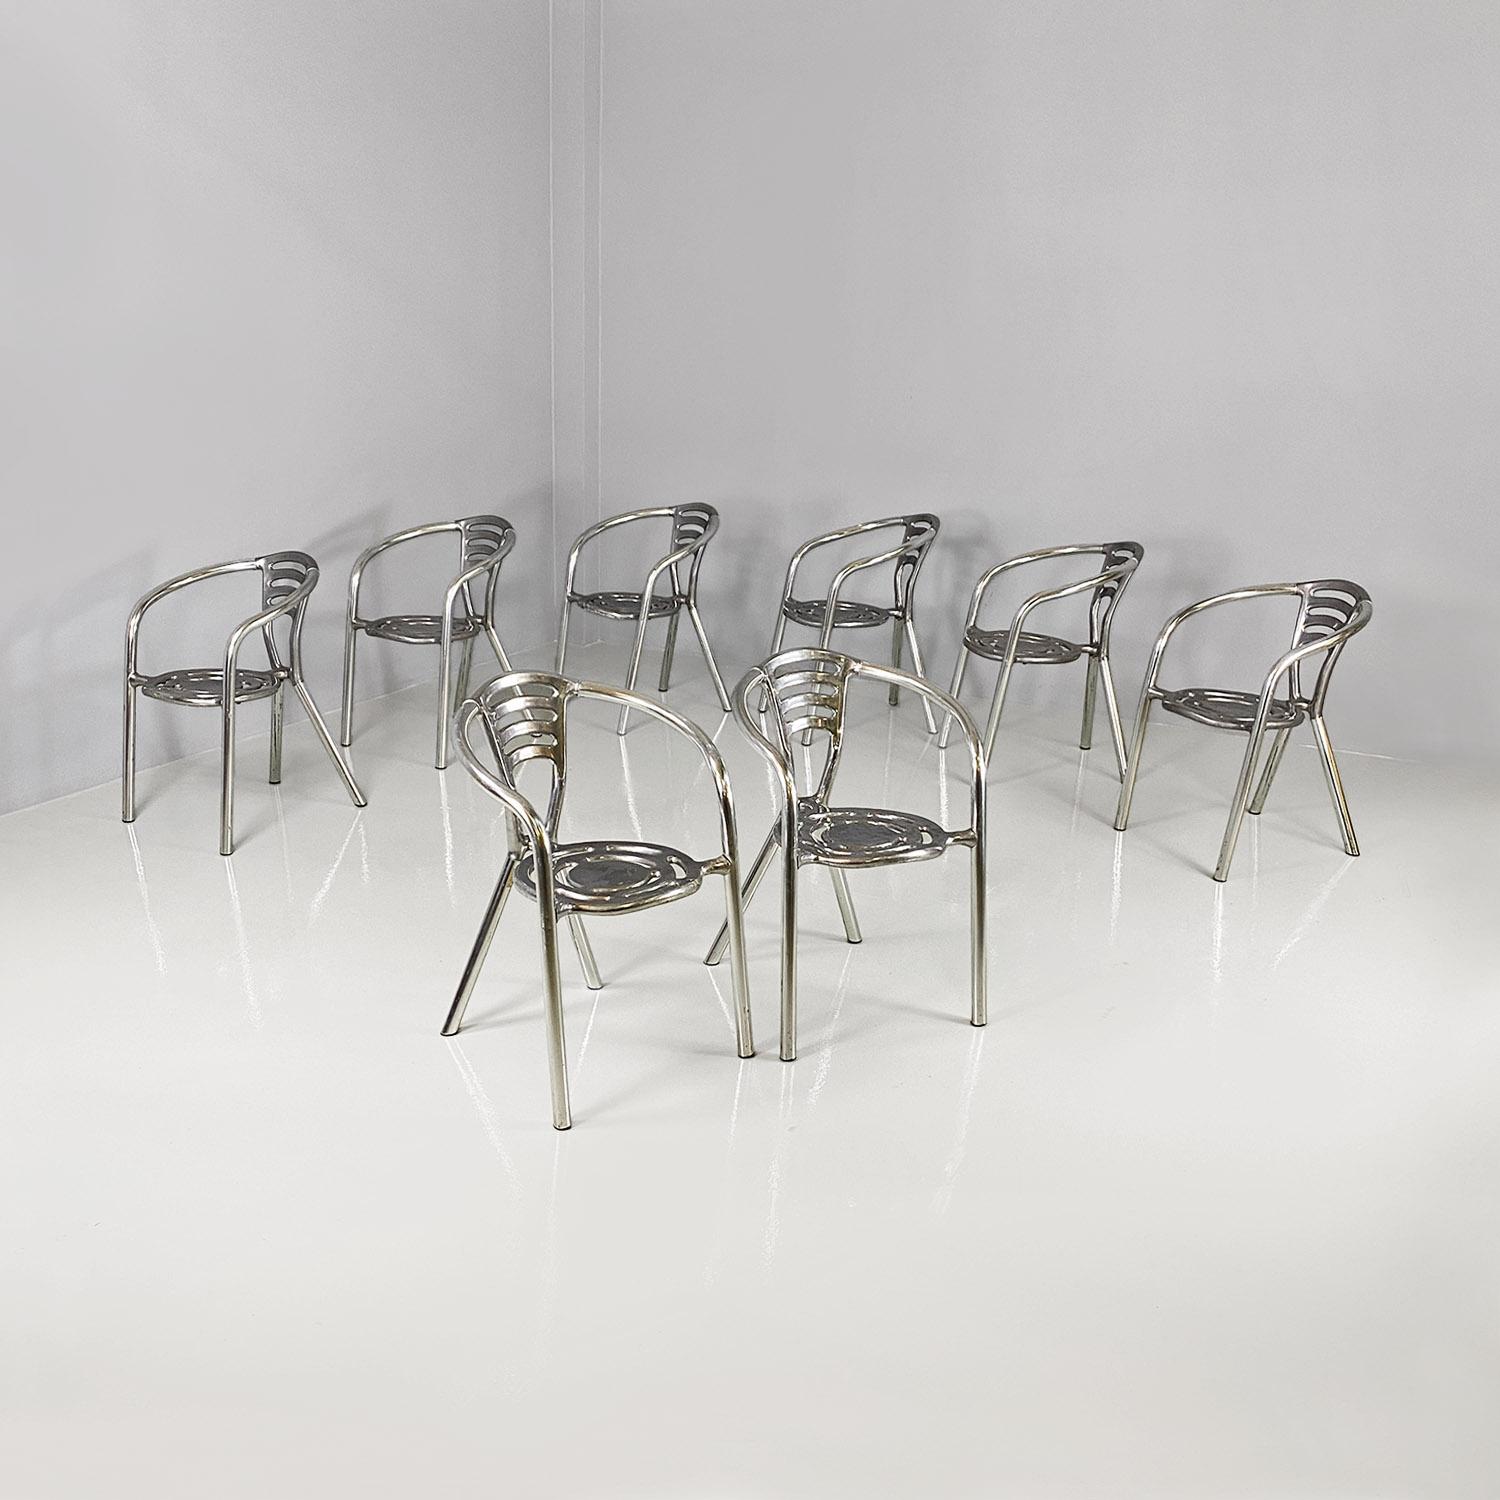 Set of eight Boulevard model chairs with round seat, entirely in aluminium. The seat and backrest have decorative perforations with curved lines and the structure of the armrests and legs is made of aluminum tubing. The structure and seat have a